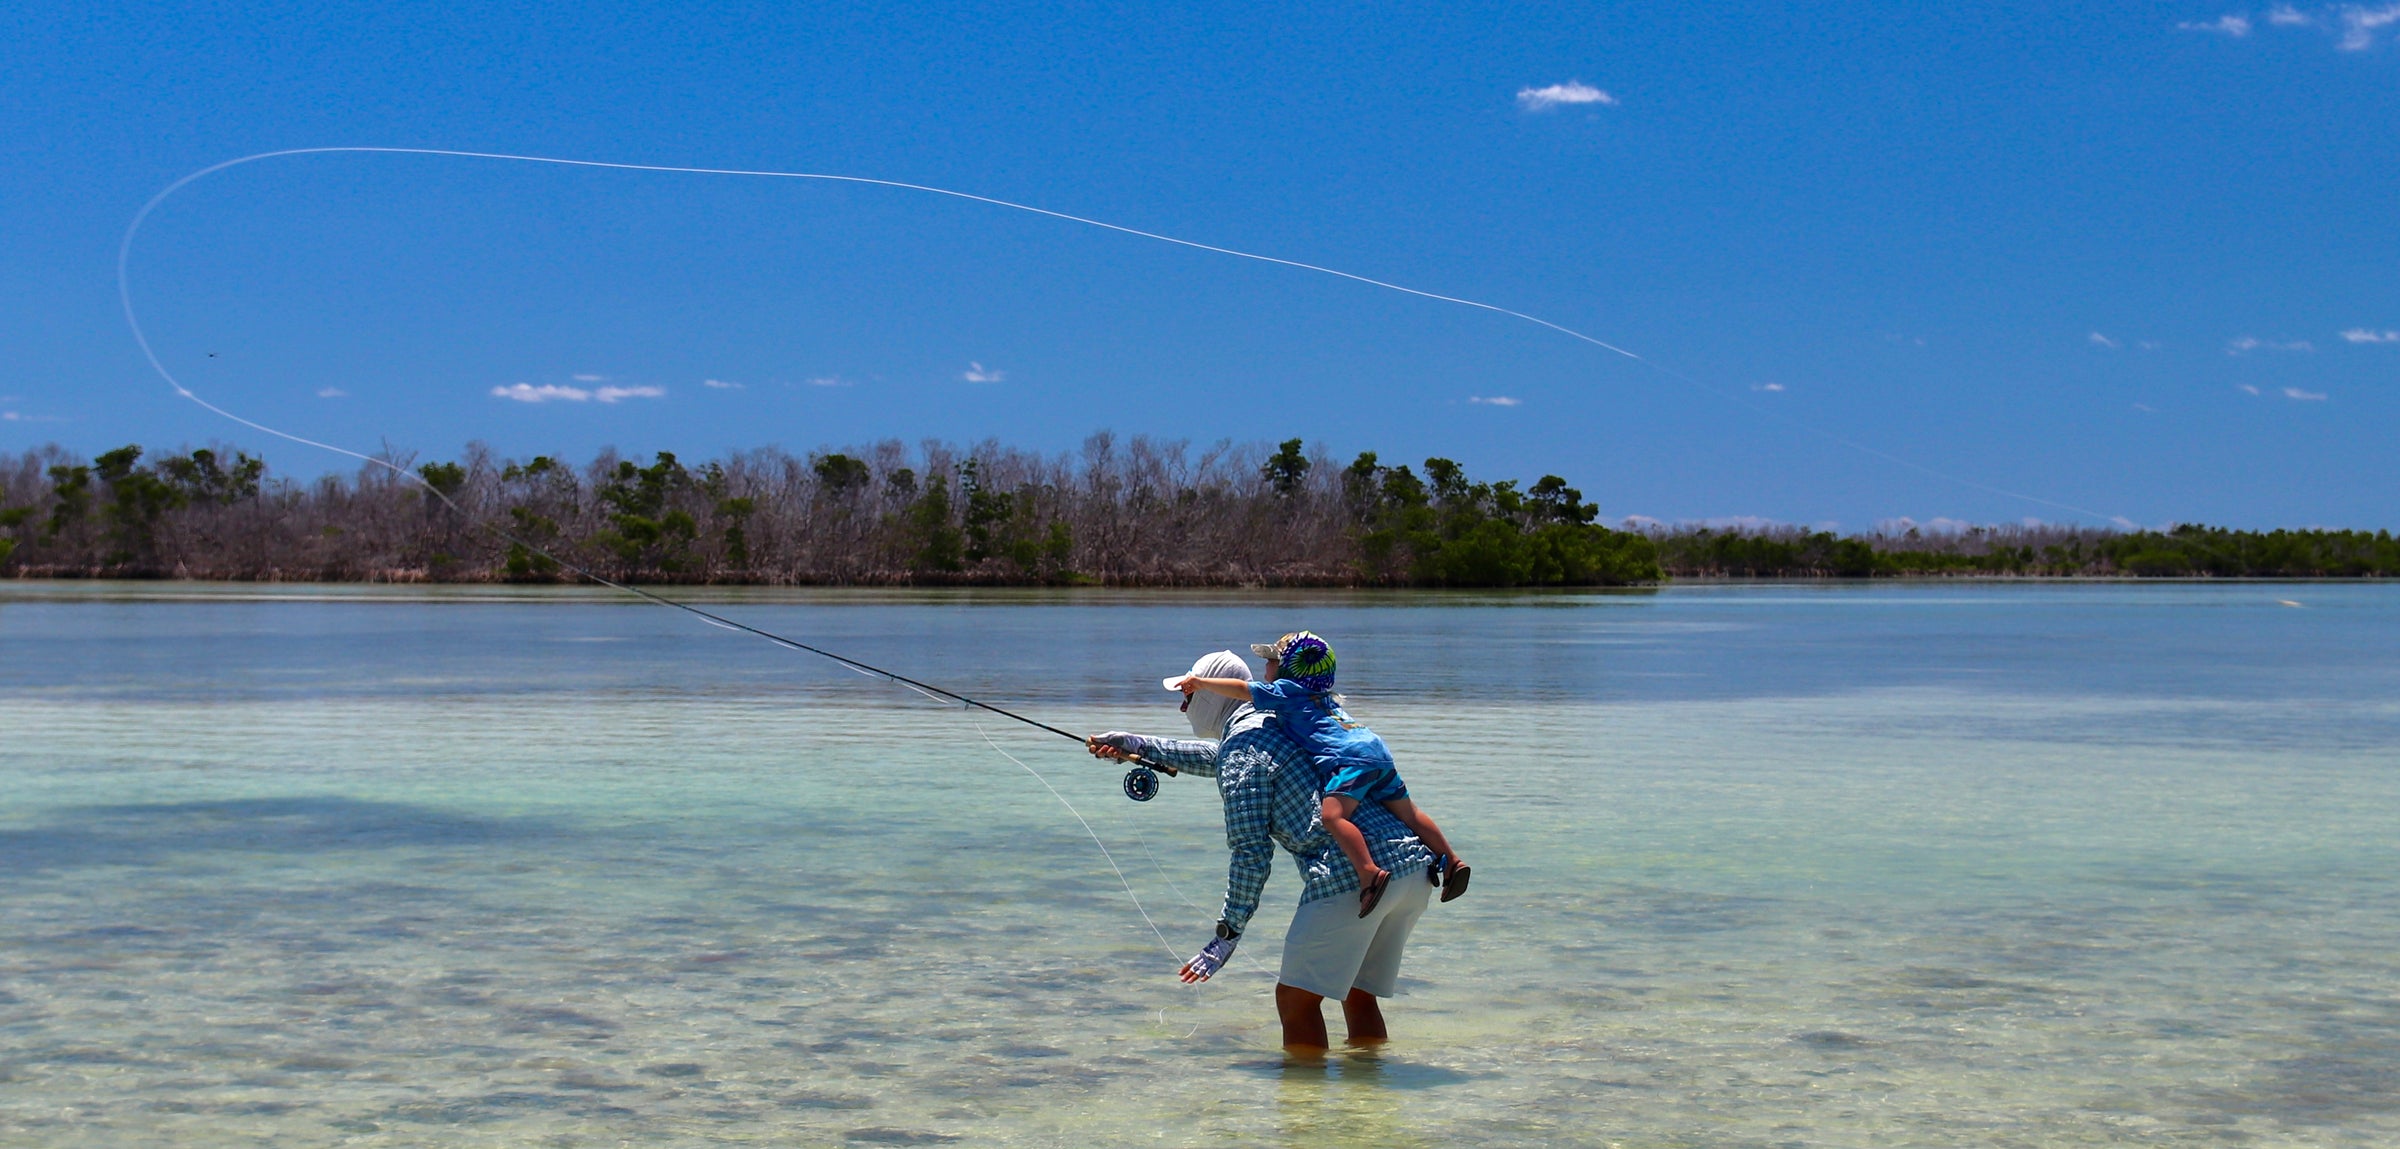 Fly fishing with kid on your back, shallow water, sunny day